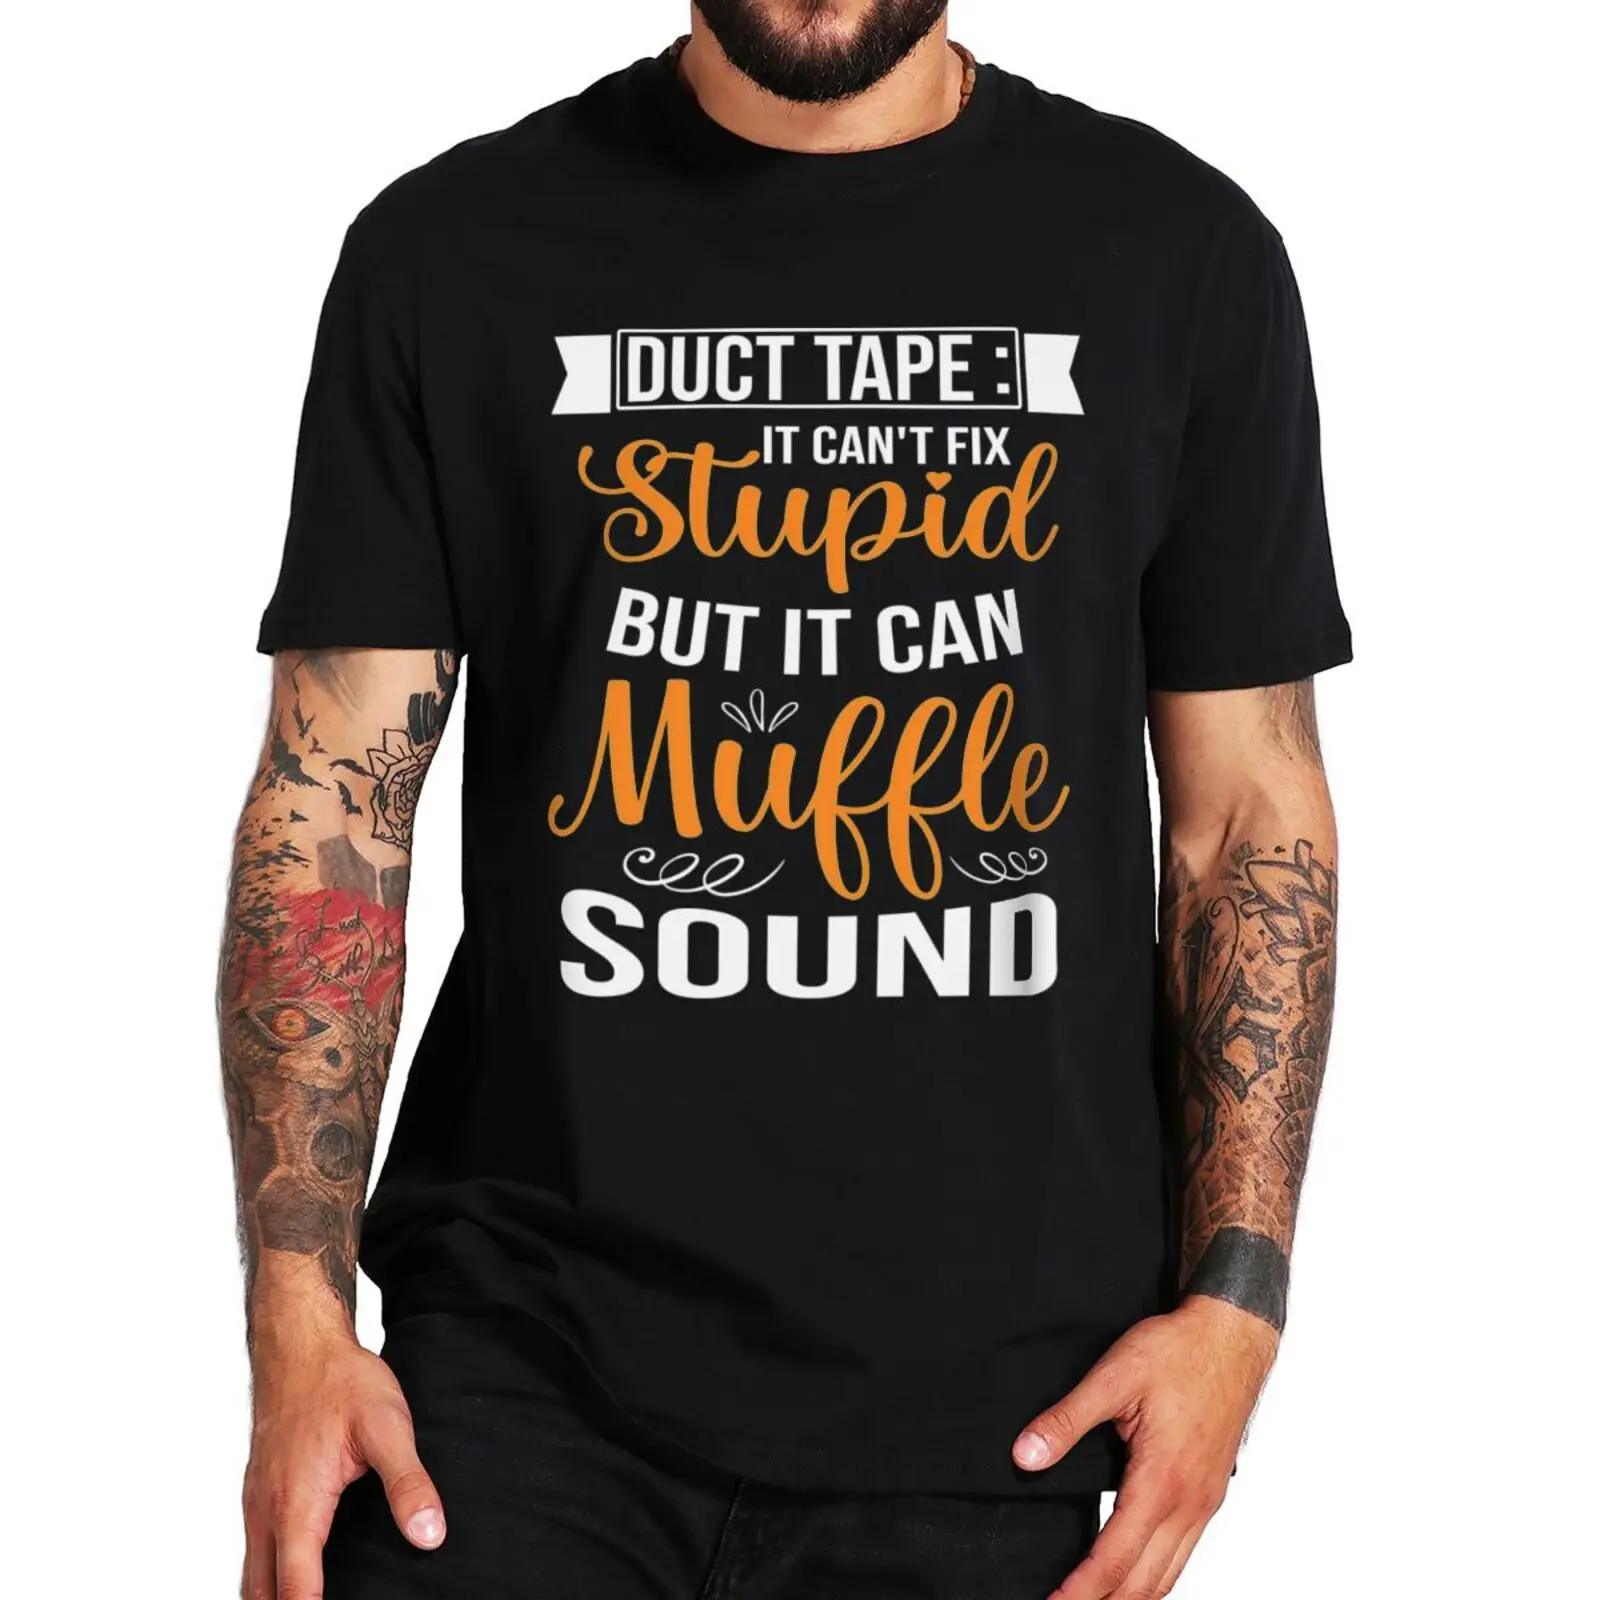 

Duct Tape It Can't Fix Stupid But It Can Muffle The Sound T Shirt Funny Quotes Sarcastic Tee Casual Cotton Unisex O-neck T-shirt